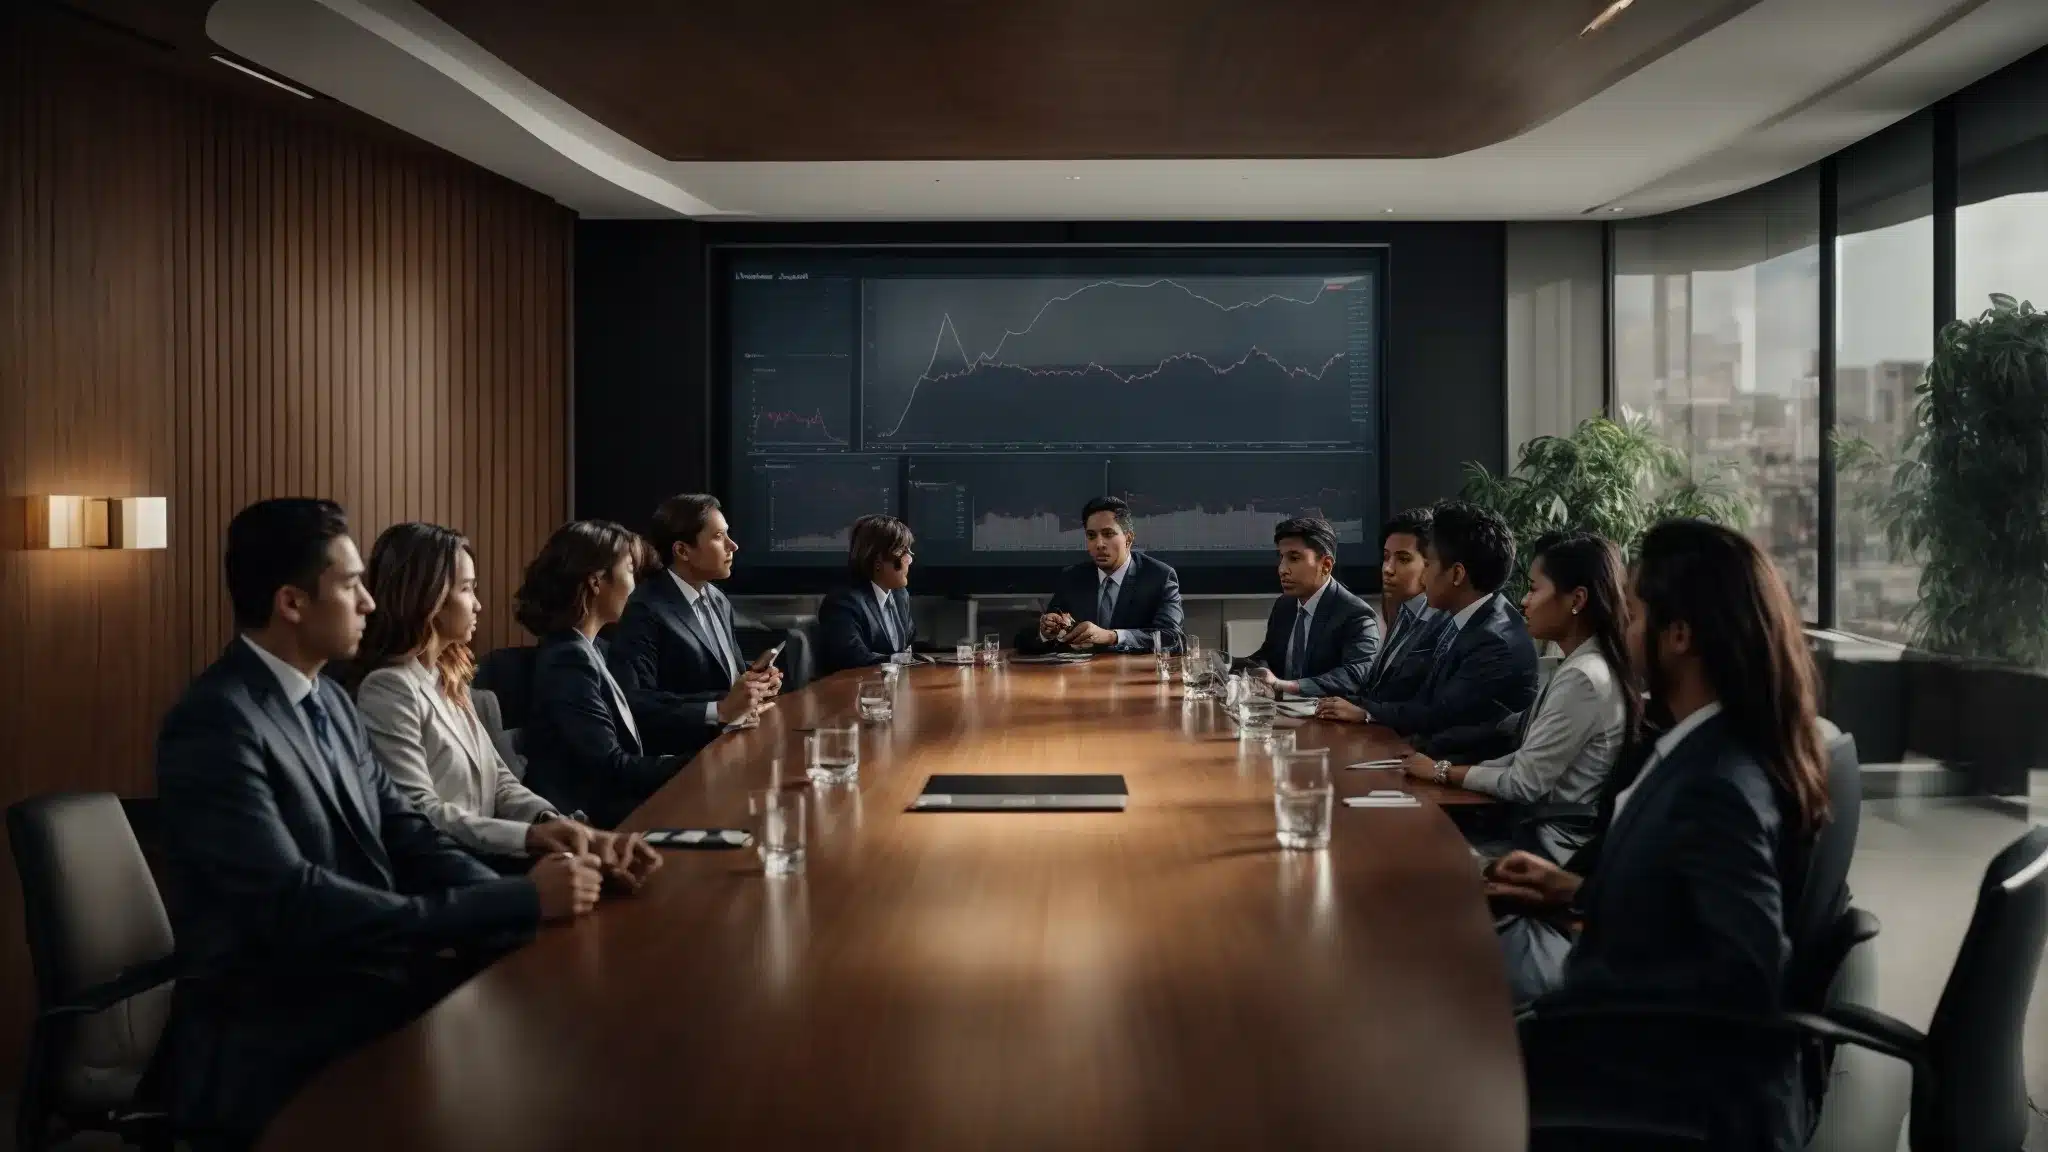 A Boardroom With Marketing Professionals Analyzing Charts Depicting Customer Demographics And Preferences On A Large Screen.